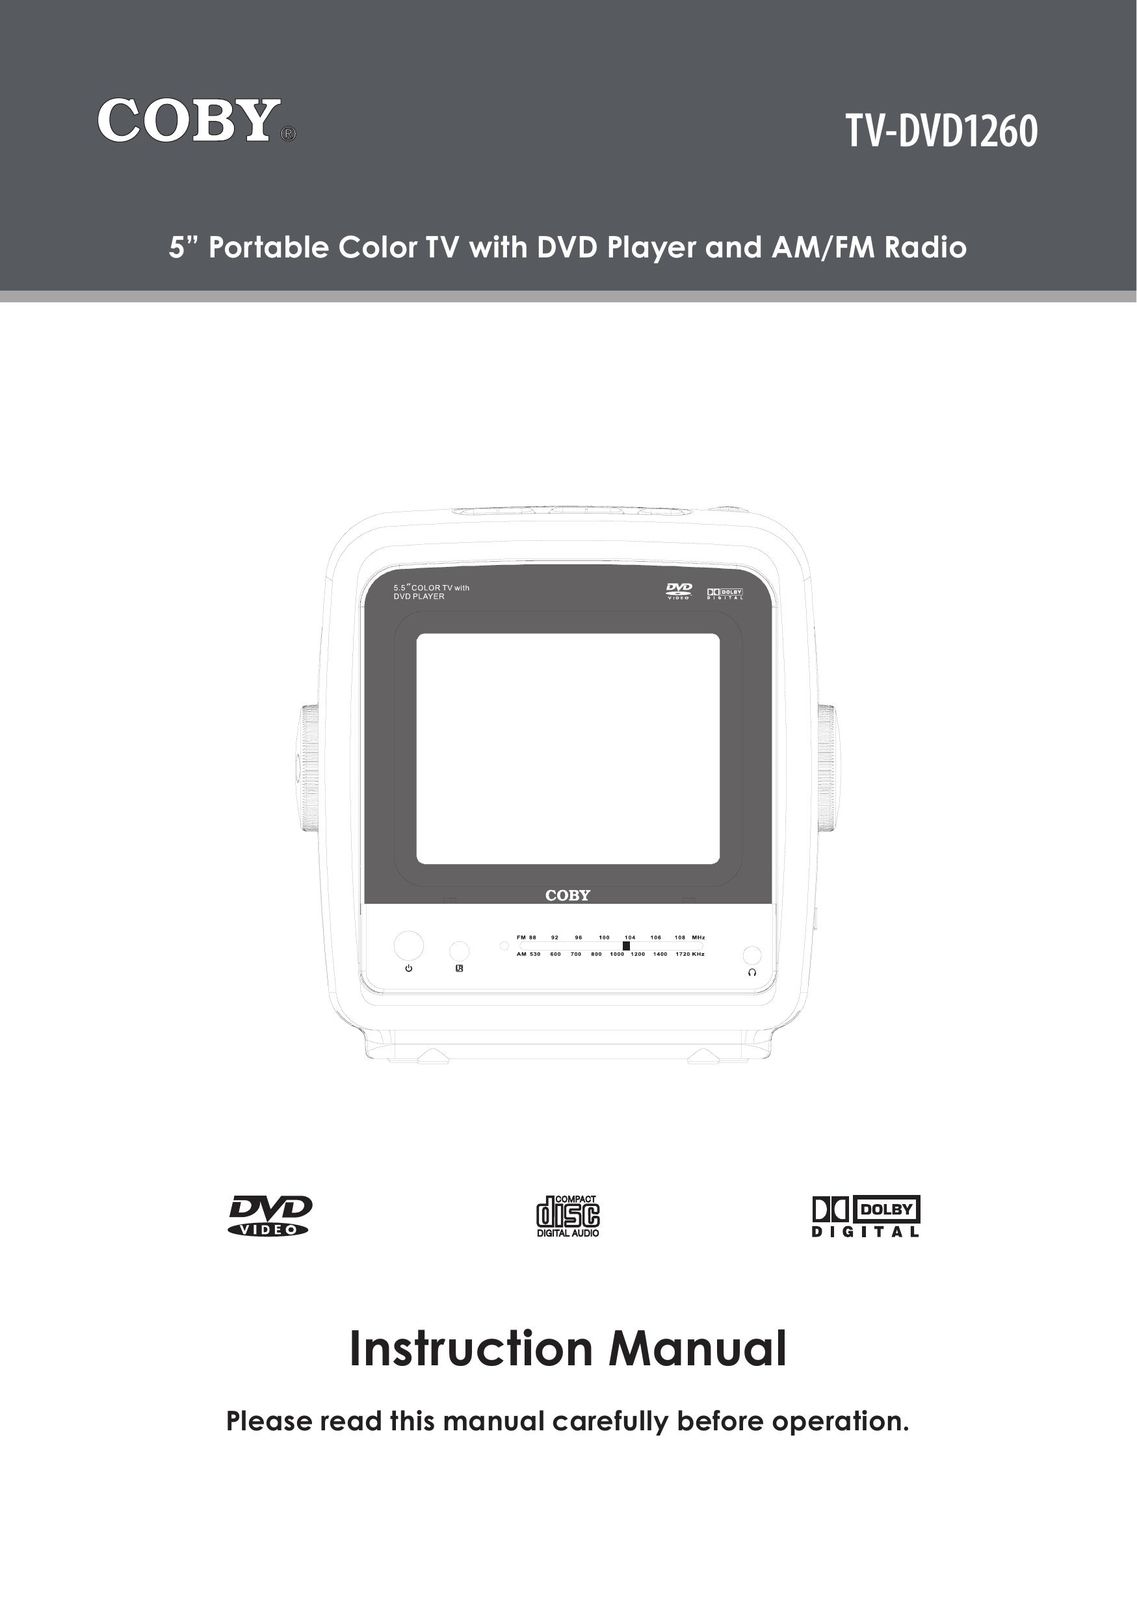 COBY electronic TV-DVD1260 Planer User Manual